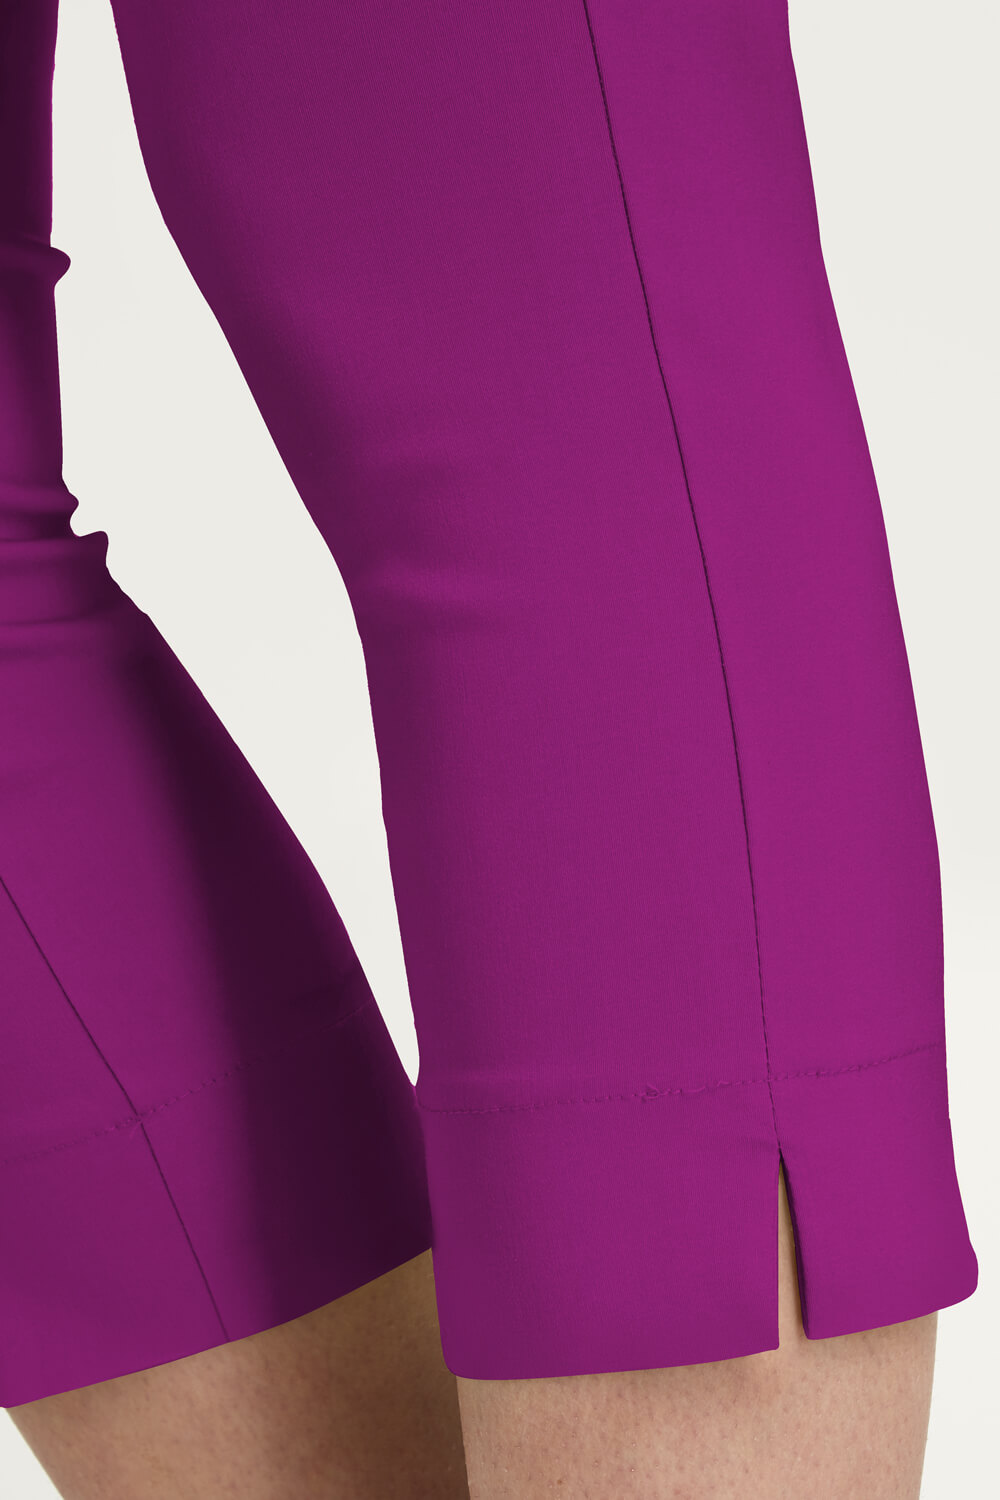 MAGENTA Cropped Stretch Trouser, Image 3 of 6